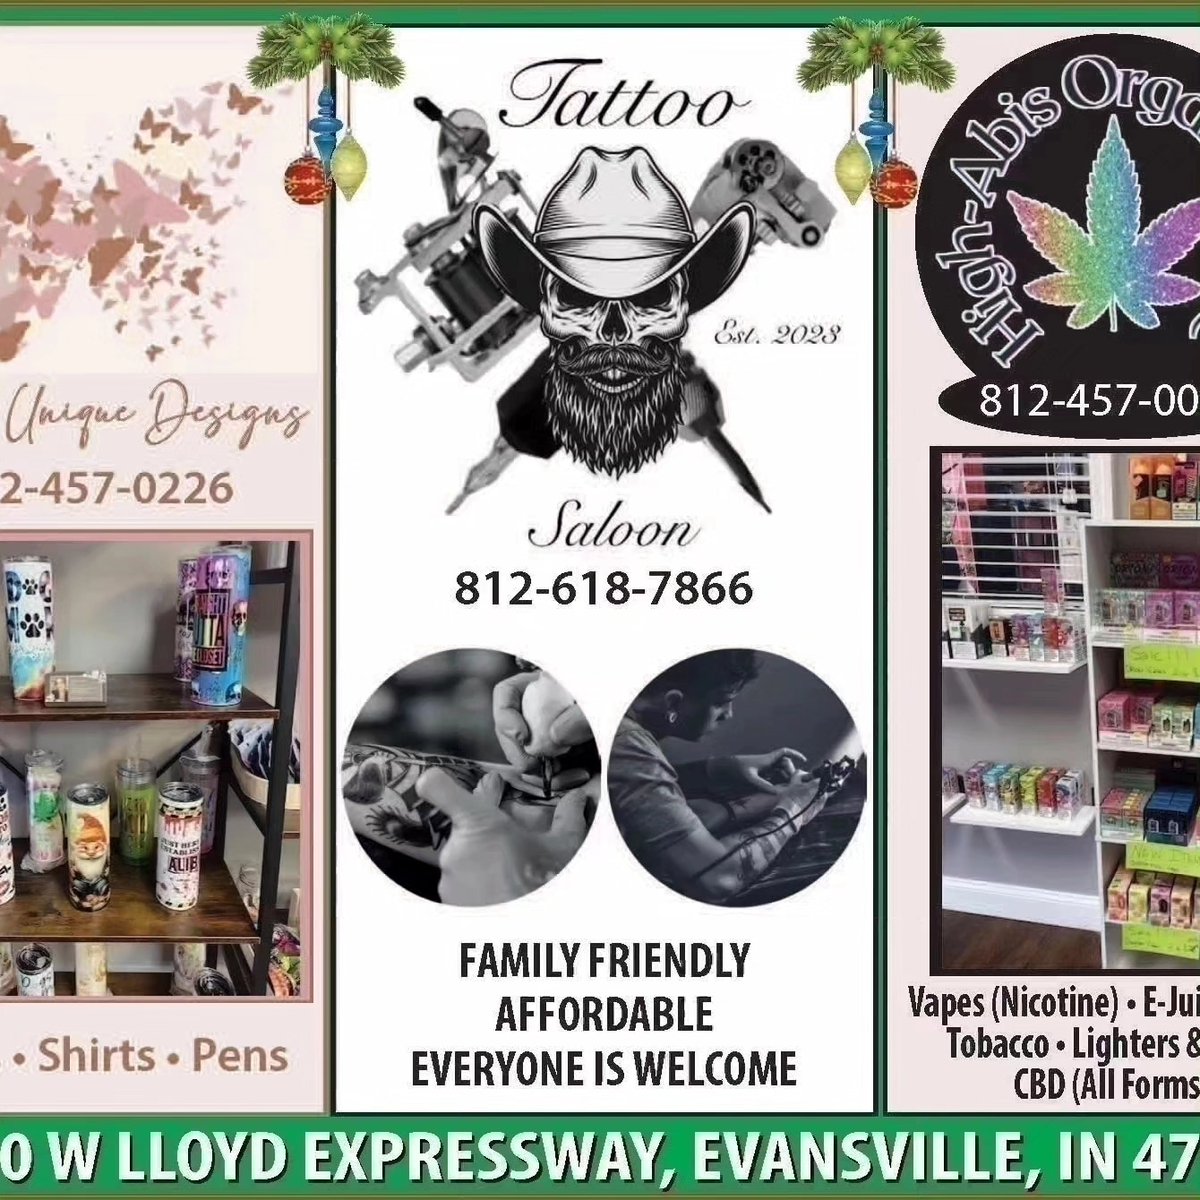 Come check us out we are a family owned business we have 3 in 1 we have CC's Unique Designs,Tattoo Saloon  and High-Abis Organics  Smoke Shop  we are located at 4820W Lloyd Expressway Suite A Evansville Indiana 812-457-0078 we open at 10:00 AM